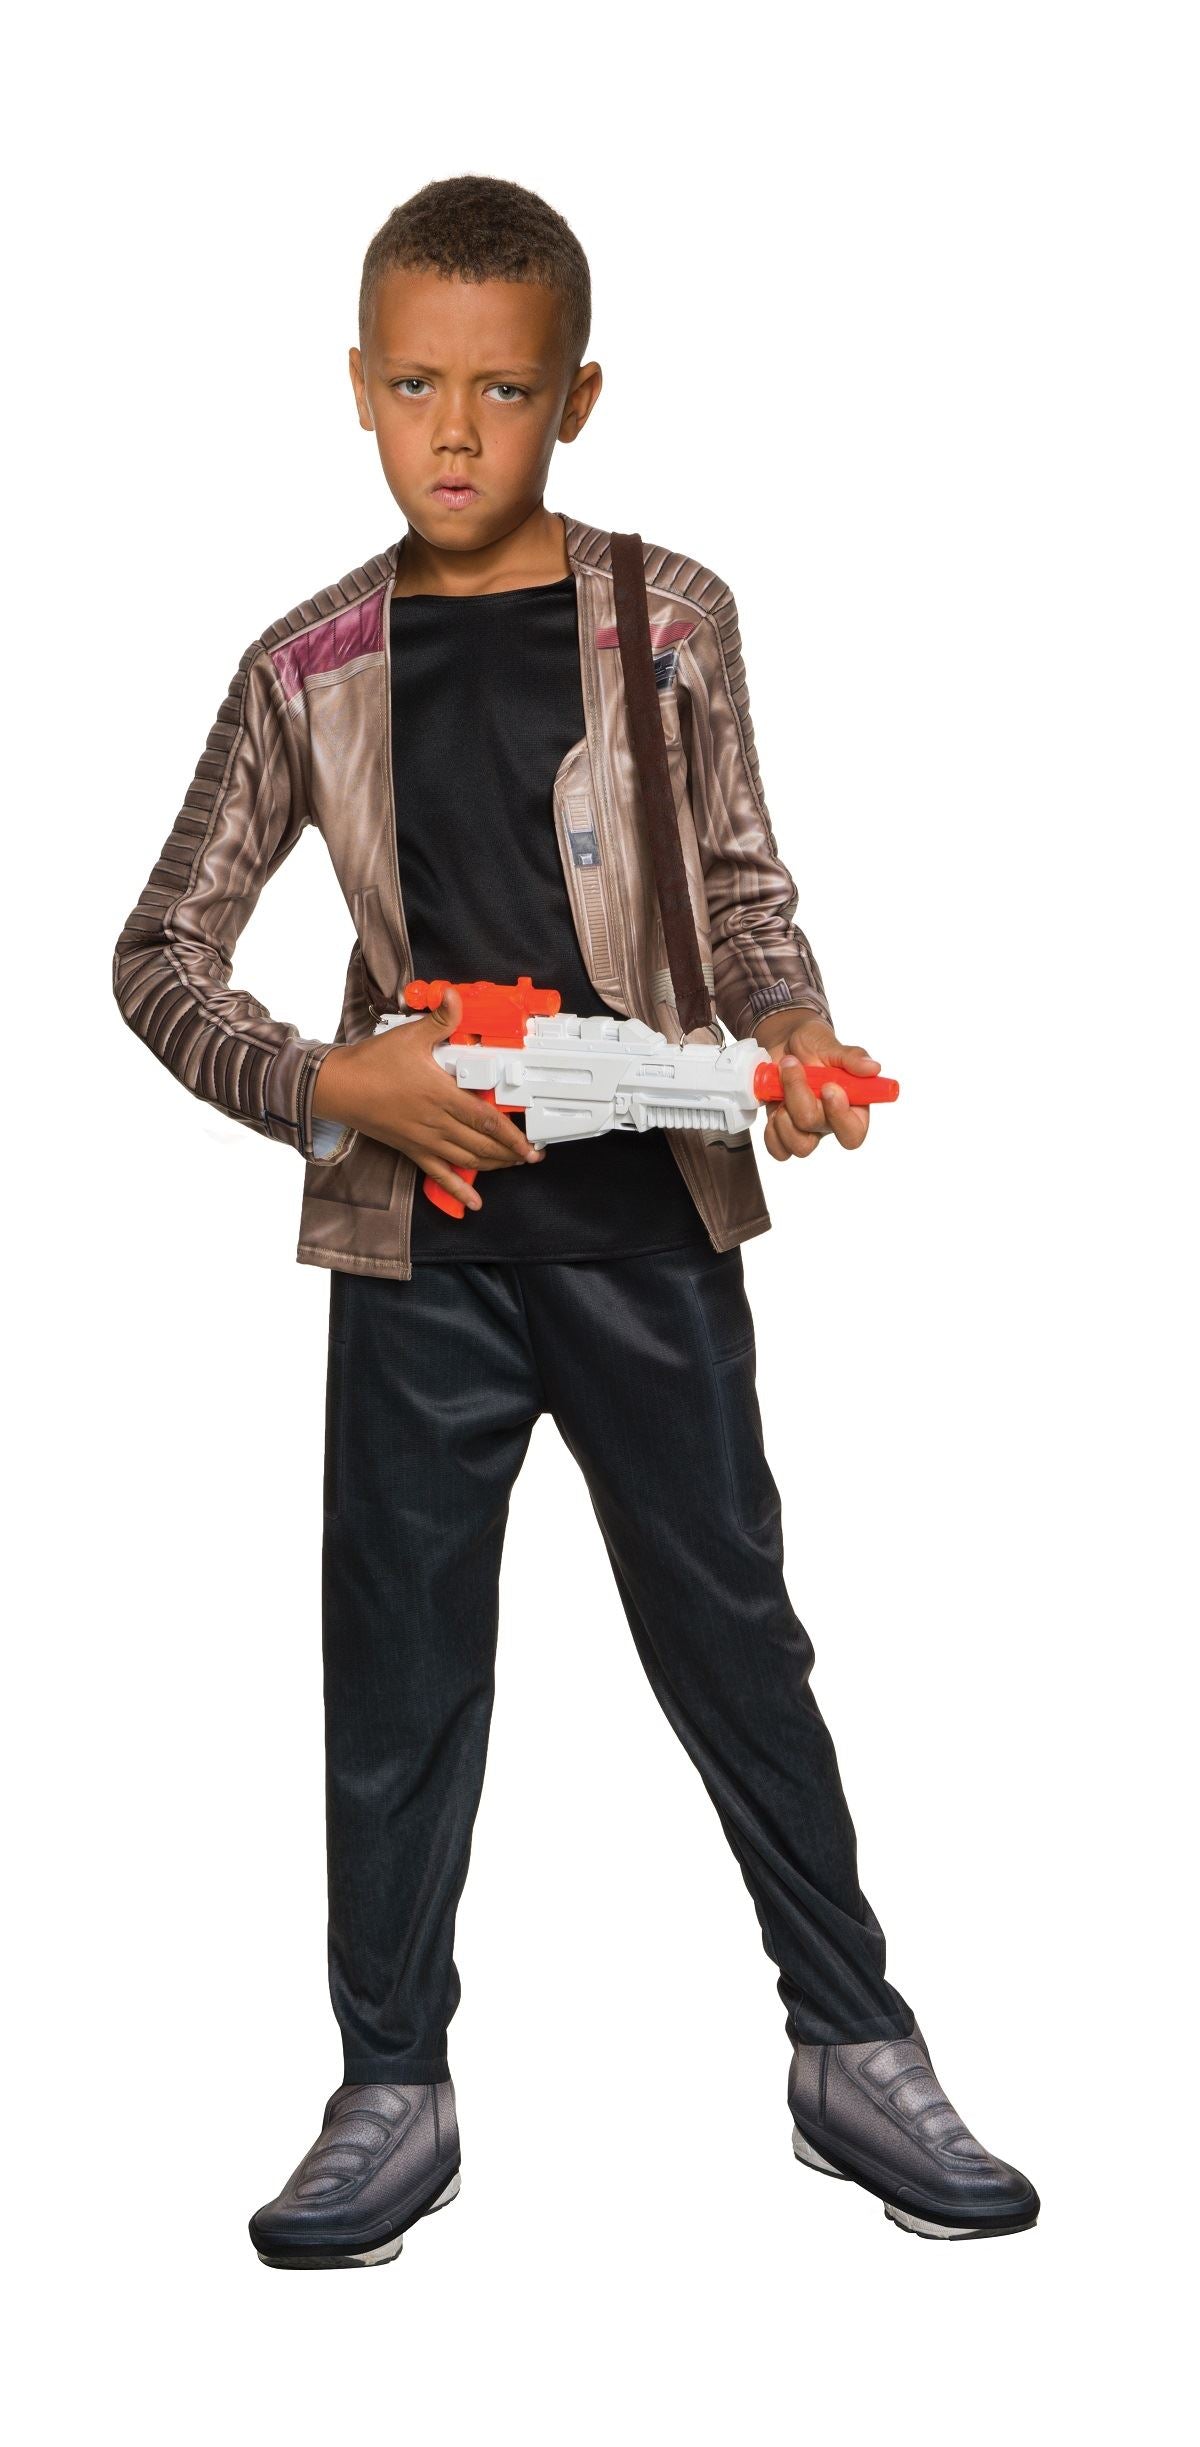 Battler Star Wars Episode 7 Boys Costume by Rubies Costumes only at  TeeJayTraders.com